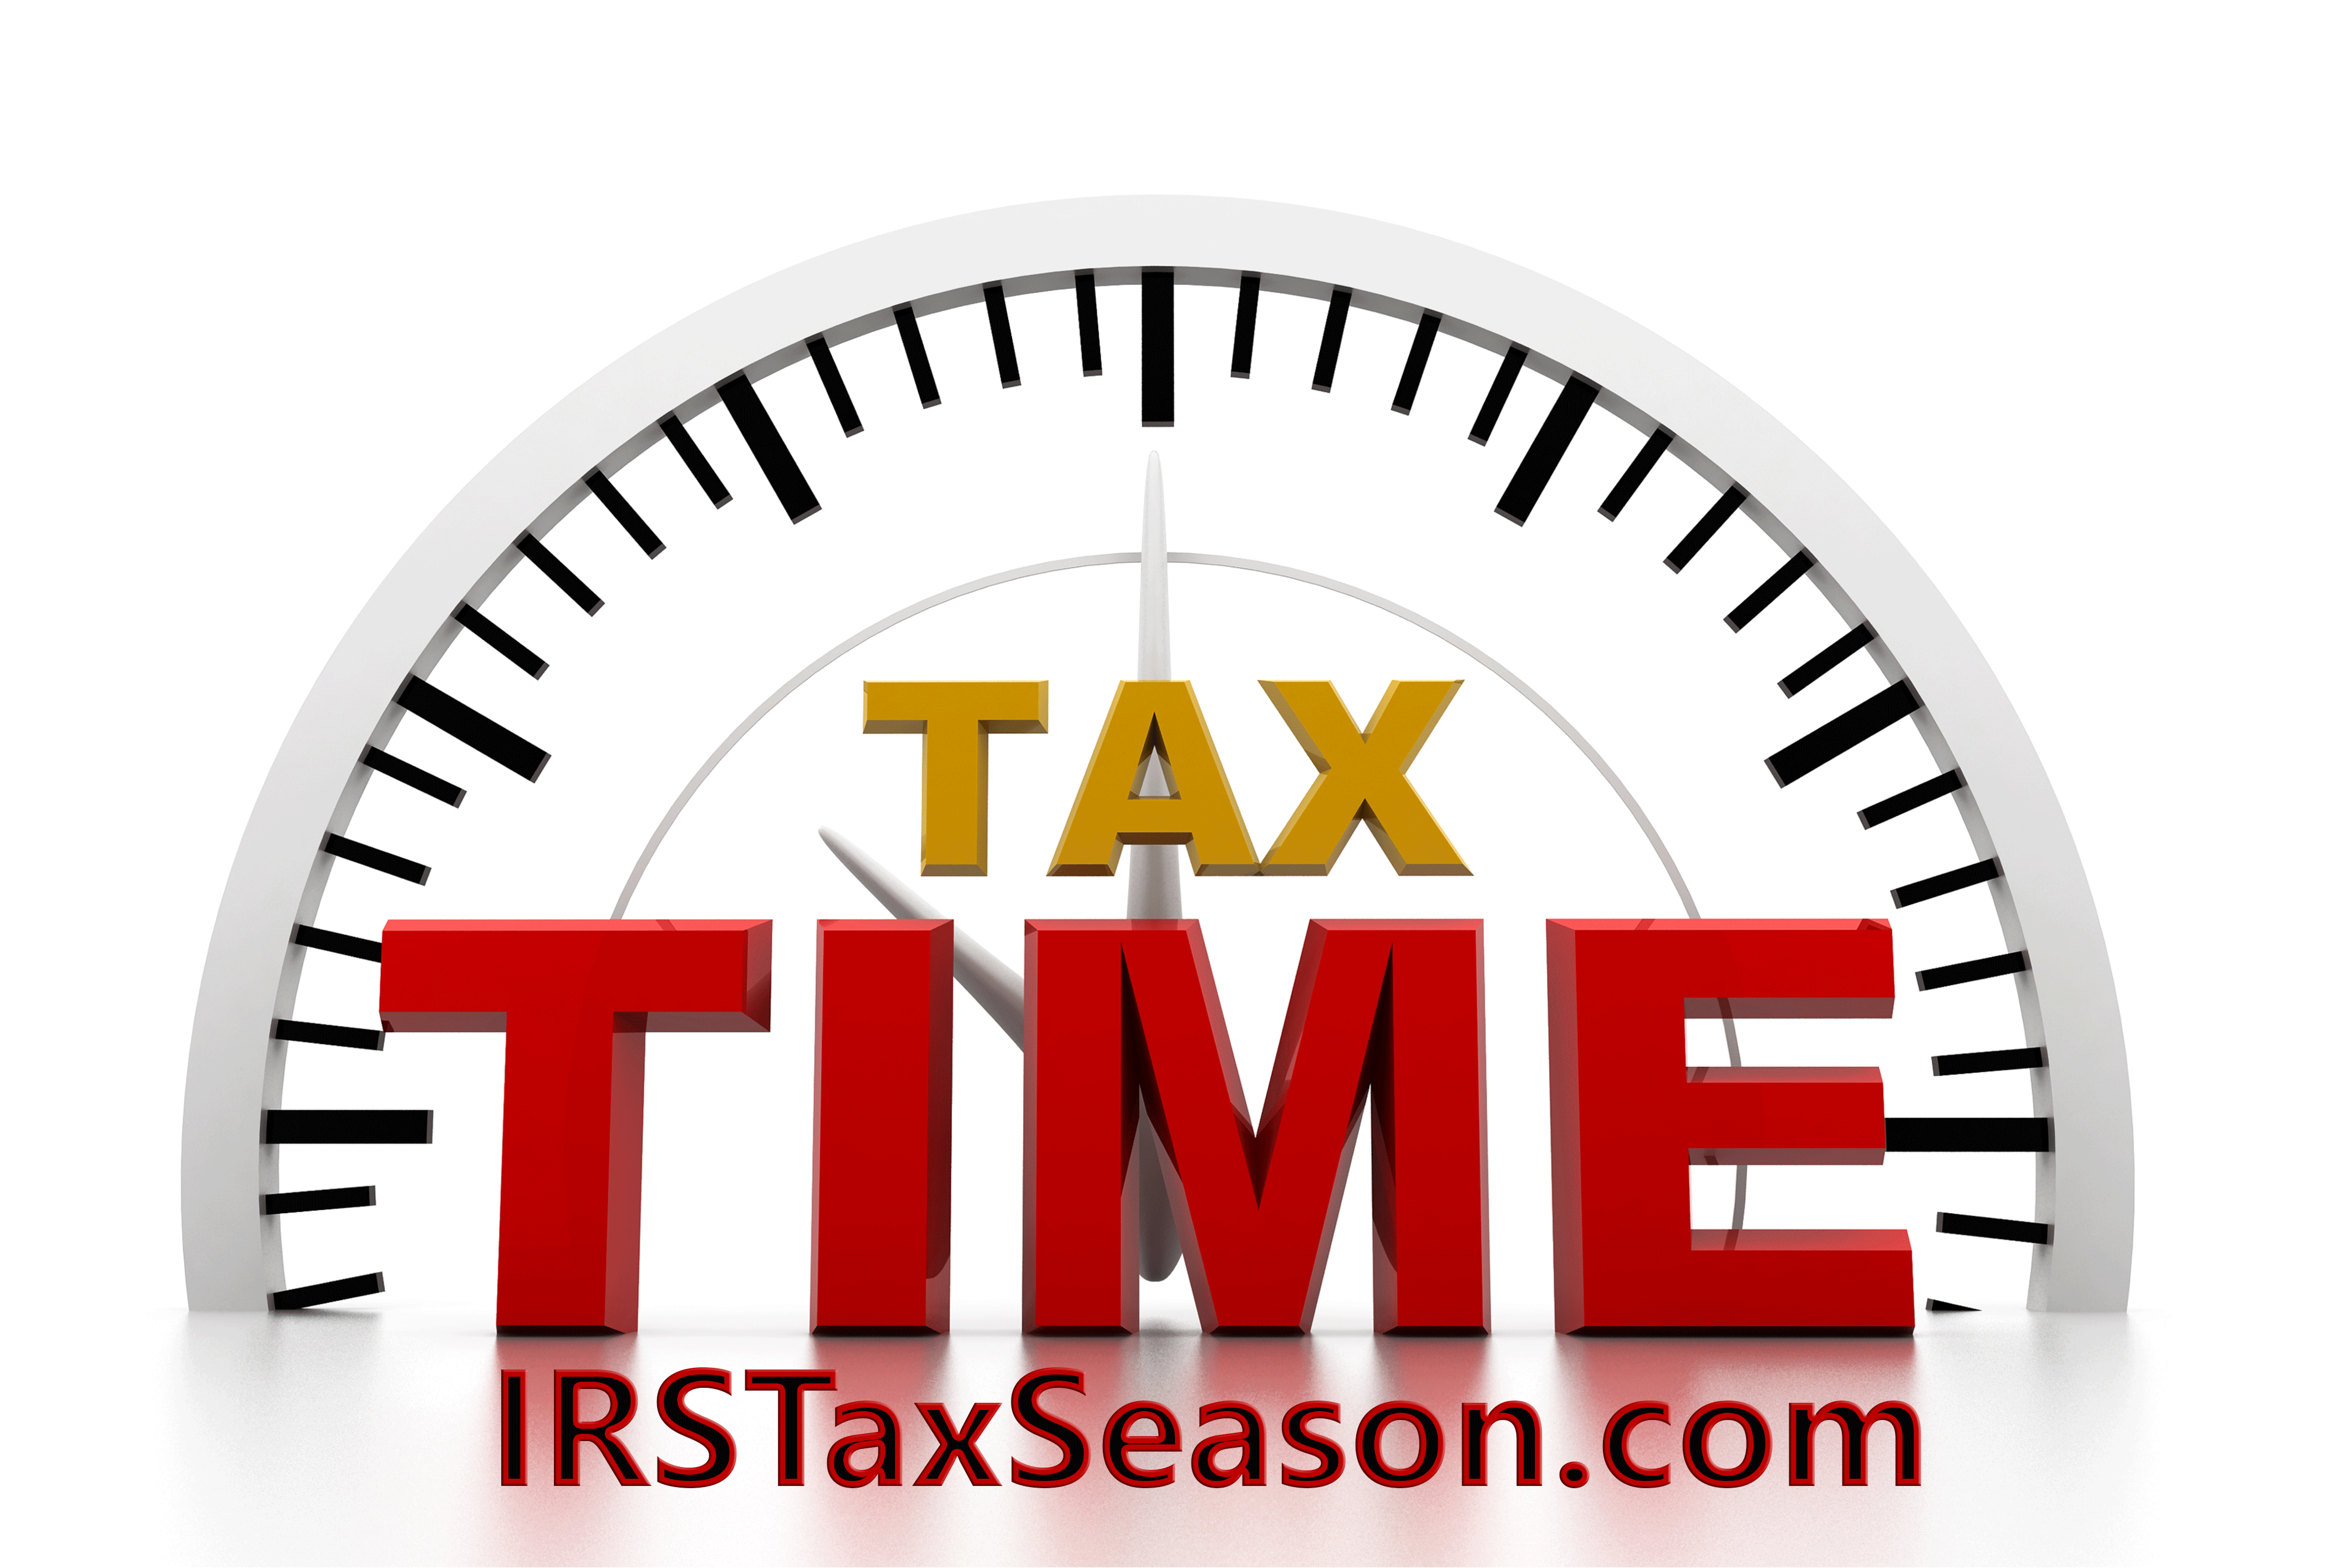 Download States United Return Text Brand Tax Preparation HQ PNG Image